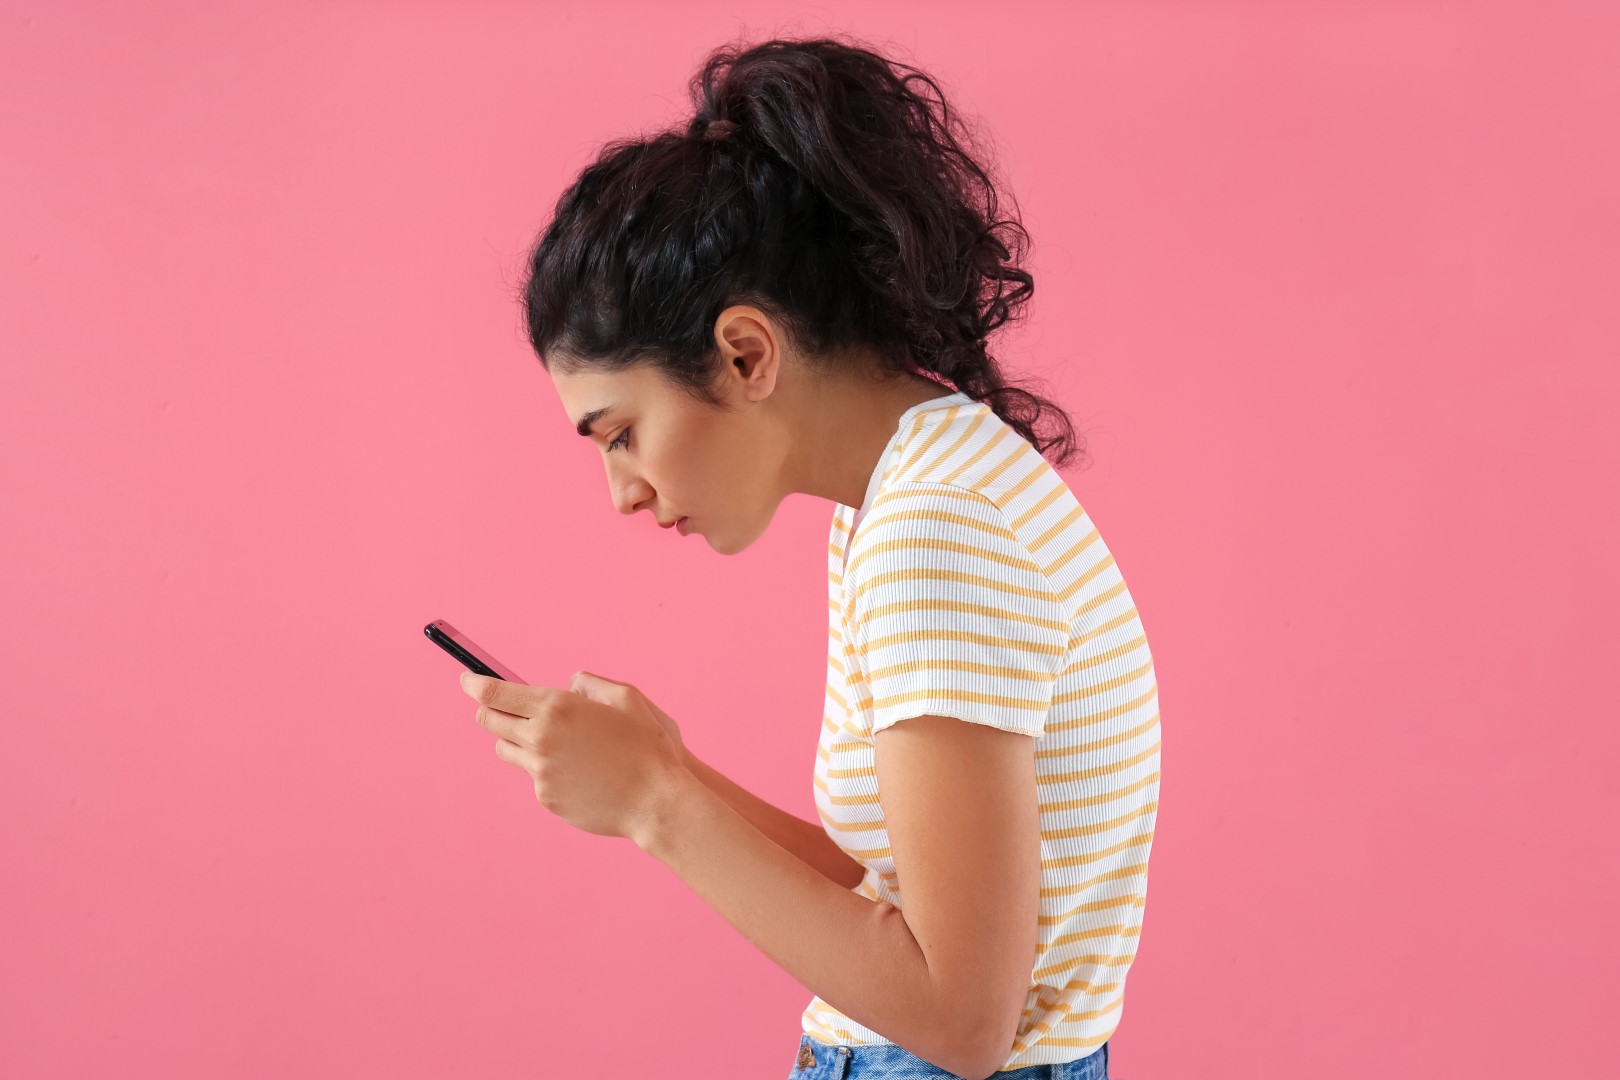 Young,Woman,With,Bad,Posture,Using,Mobile,Phone,On,Color